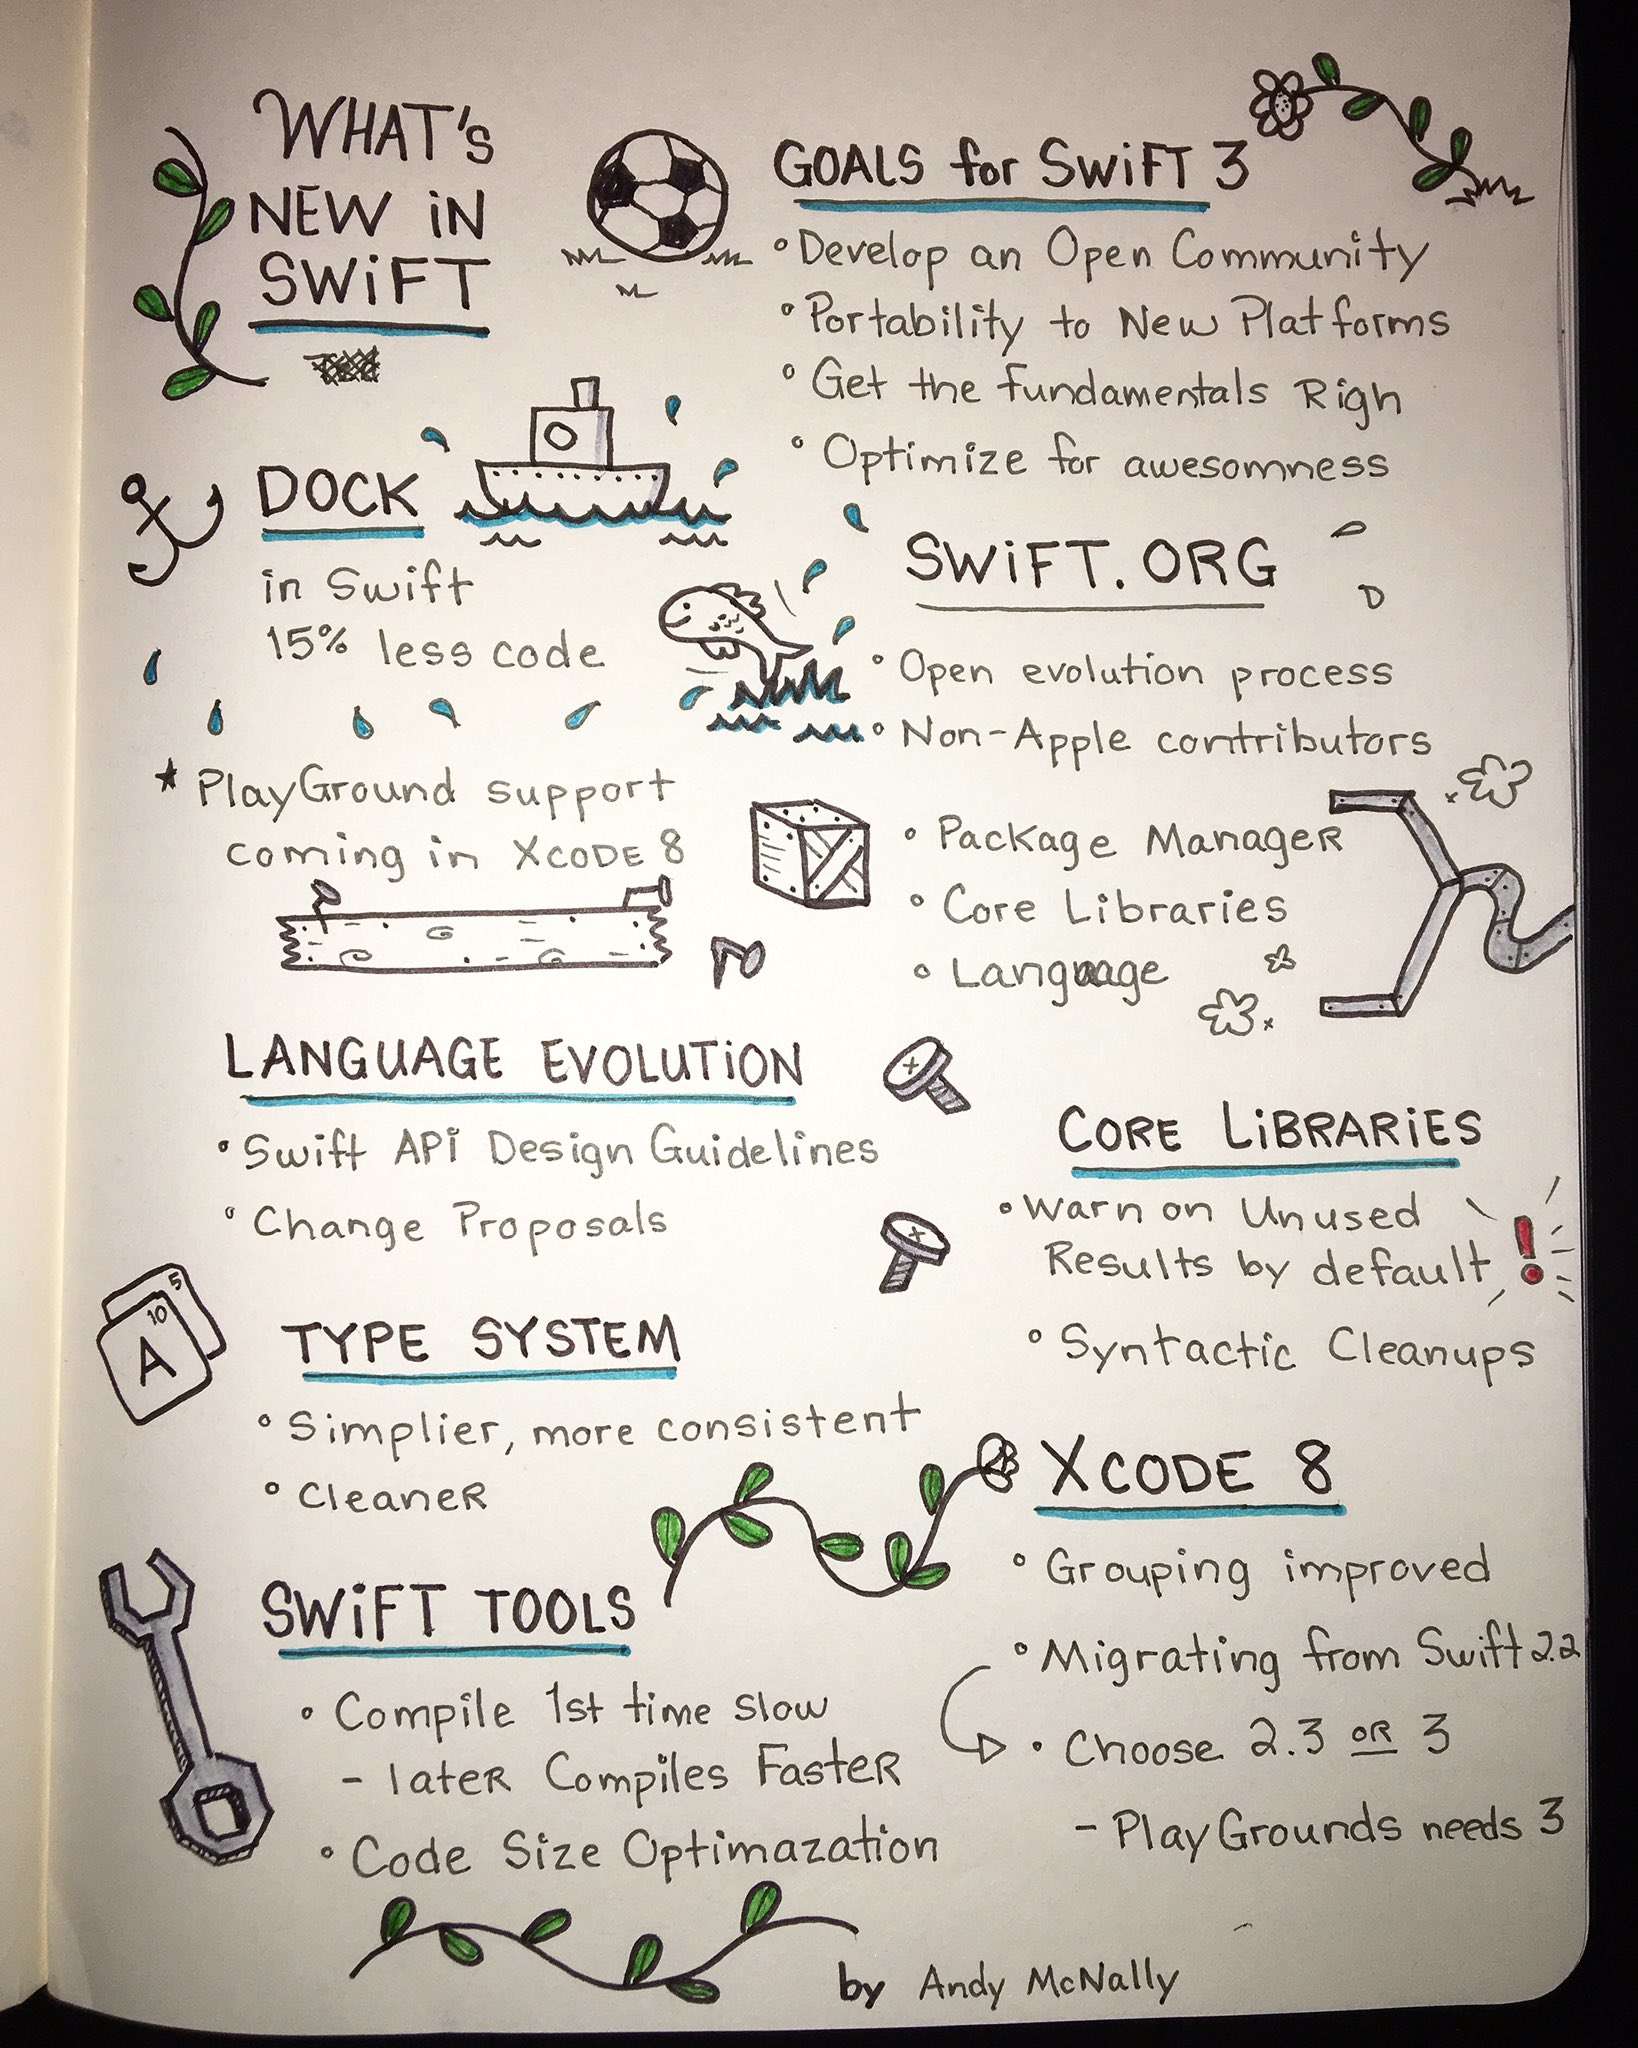 What's new in Swift at WWDC 2016